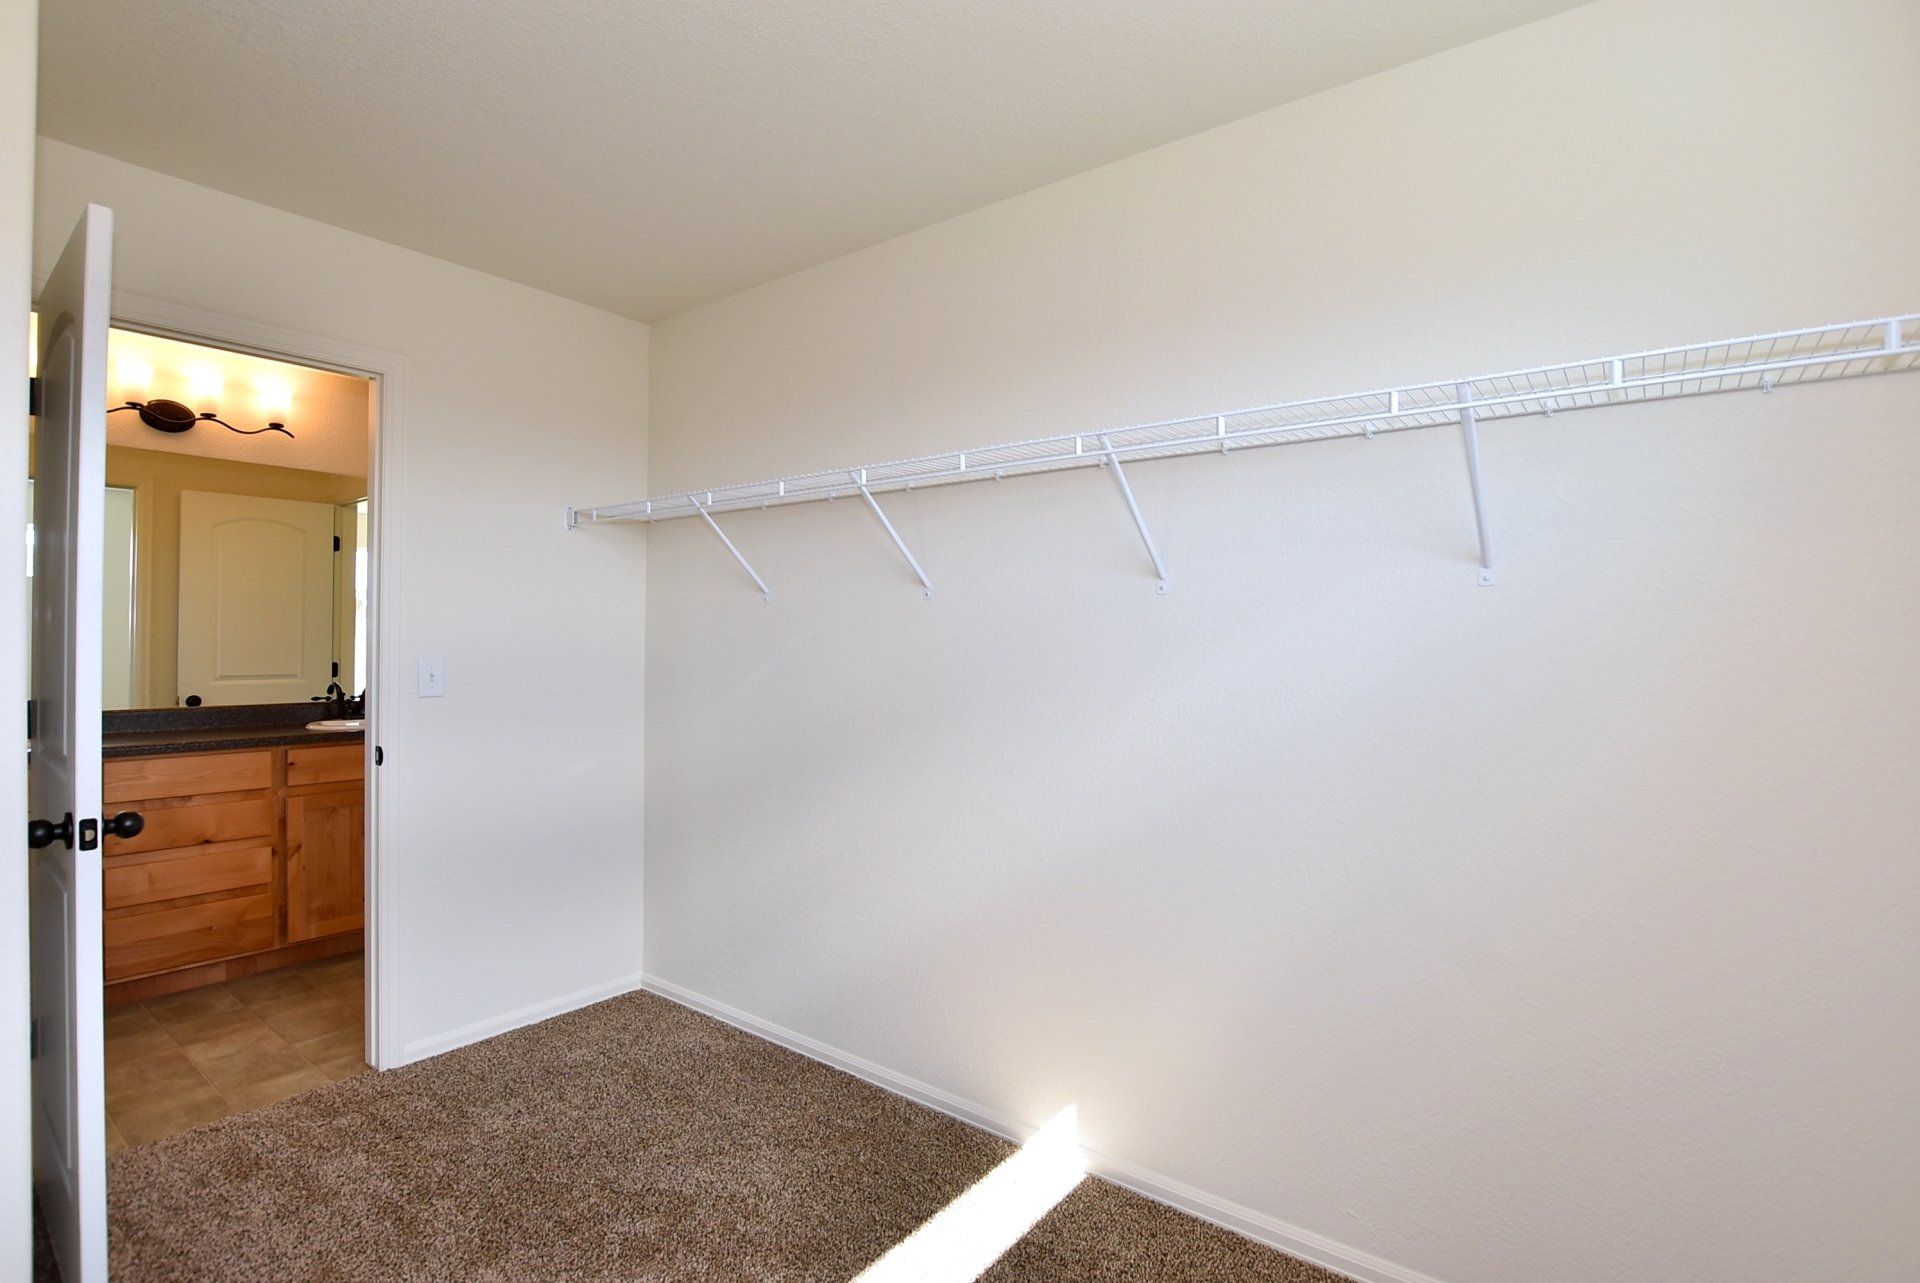 Large walk in closet with shelves